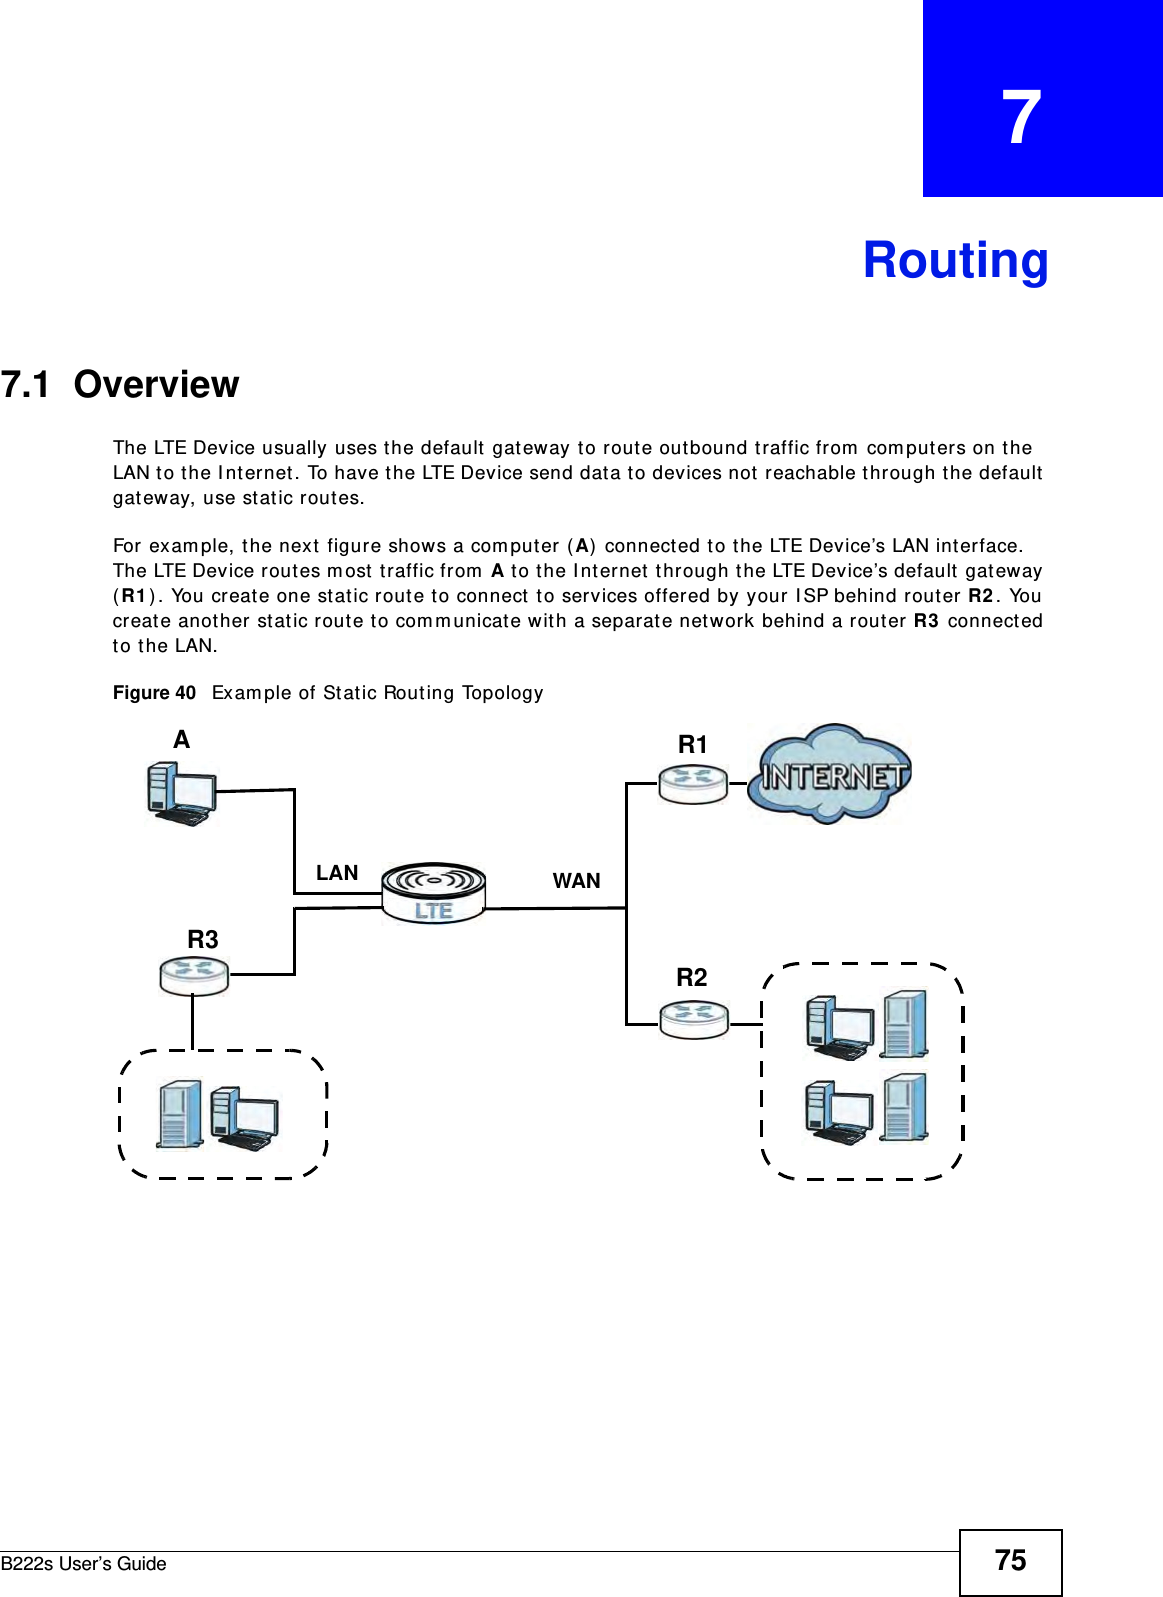 B222s User’s Guide 75CHAPTER   7Routing7.1  OverviewThe LTE Device usually uses the default gat eway t o route out bound t raffic from  com puters on t he LAN to t he I nternet . To have t he LTE Device send dat a t o devices not  reachable t hrough t he default  gat eway, use stat ic rout es.For exam ple, the next  figure shows a com puter (A)  connected t o t he LTE Device’s LAN int erface. The LTE Device rout es m ost  t raffic from  A t o t he I nternet  t hrough t he LTE Device’s default  gat eway (R1 ) . You creat e one st at ic rout e t o connect  t o services offered by your I SP behind rout er R2 . You creat e another static rout e t o com m unicat e with a separat e net work behind a router R3  connect ed to t he LAN. Figure 40   Exam ple of Stat ic Routing TopologyWANR1R2AR3LAN